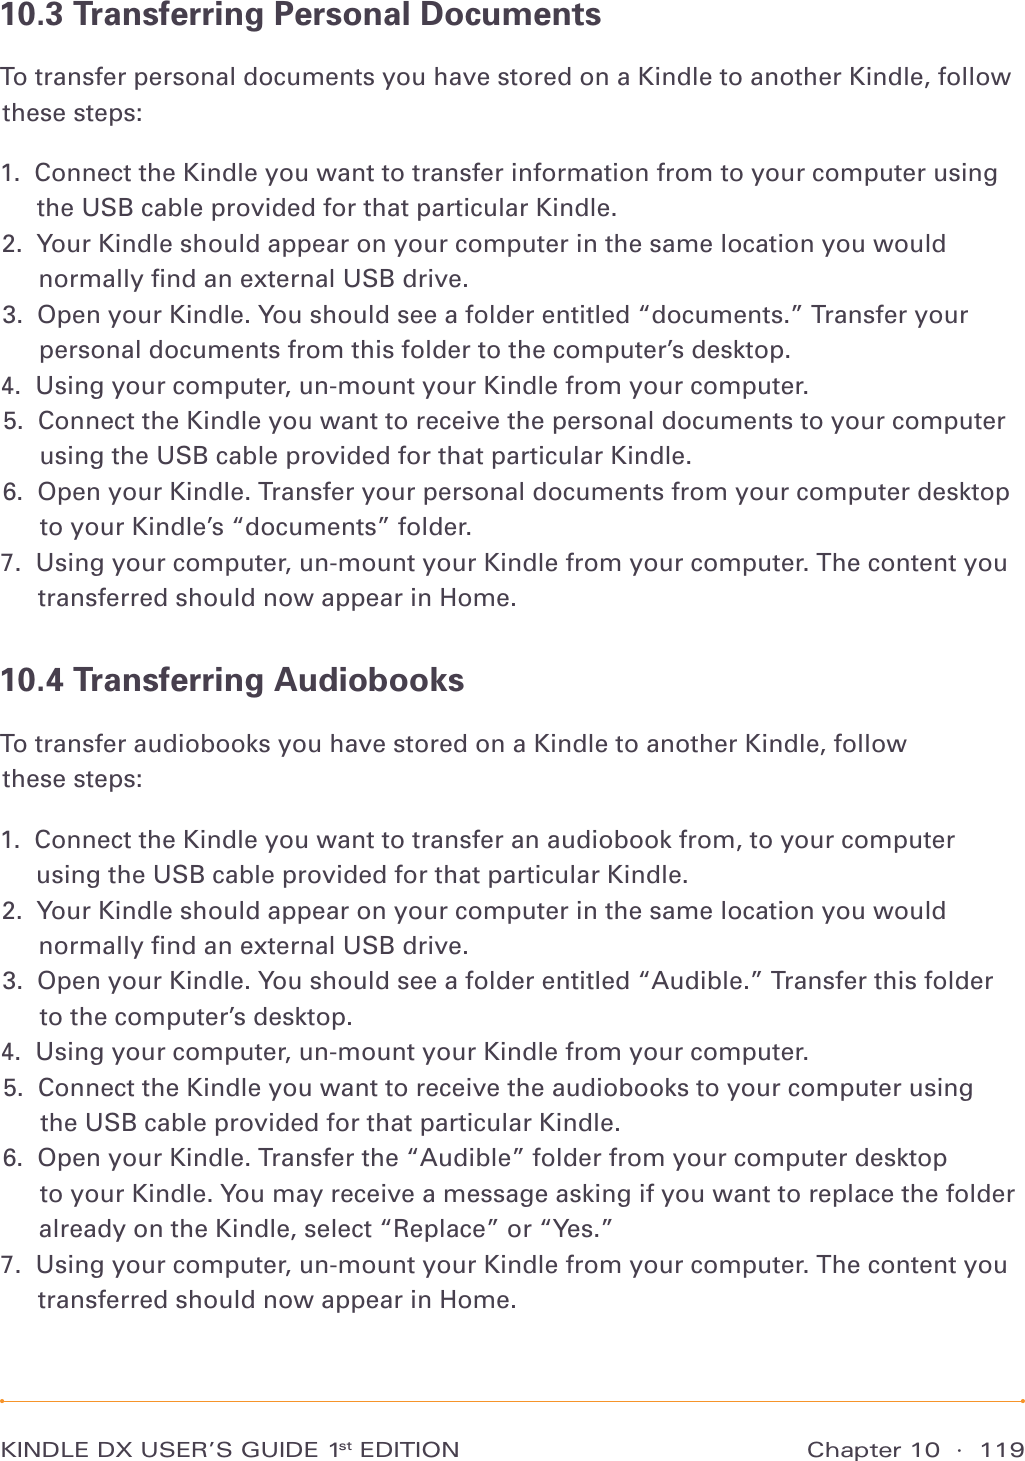 Chapter 10  ·  119KINDLE DX USER’S GUIDE 1st EDITION10.3 Transferring Personal DocumentsTo transfer personal documents you have stored on a Kindle to another Kindle, follow these steps:1.   Connect the Kindle you want to transfer information from to your computer using the USB cable provided for that particular Kindle. 2.   Your Kindle should appear on your computer in the same location you would normally ﬁnd an external USB drive. 3.   Open your Kindle. You should see a folder entitled “documents.” Transfer your personal documents from this folder to the computer’s desktop. 4.  Using your computer, un-mount your Kindle from your computer. 5.   Connect the Kindle you want to receive the personal documents to your computer using the USB cable provided for that particular Kindle. 6.   Open your Kindle. Transfer your personal documents from your computer desktop to your Kindle’s “documents” folder. 7.   Using your computer, un-mount your Kindle from your computer. The content you transferred should now appear in Home. 10.4 Transferring AudiobooksTo transfer audiobooks you have stored on a Kindle to another Kindle, follow  these steps:1.   Connect the Kindle you want to transfer an audiobook from, to your computer using the USB cable provided for that particular Kindle. 2.   Your Kindle should appear on your computer in the same location you would normally ﬁnd an external USB drive. 3.   Open your Kindle. You should see a folder entitled “Audible.” Transfer this folder to the computer’s desktop. 4.   Using your computer, un-mount your Kindle from your computer. 5.   Connect the Kindle you want to receive the audiobooks to your computer using  the USB cable provided for that particular Kindle. 6.   Open your Kindle. Transfer the “Audible” folder from your computer desktop  to your Kindle. You may receive a message asking if you want to replace the folder already on the Kindle, select “Replace” or “Yes.” 7.   Using your computer, un-mount your Kindle from your computer. The content you transferred should now appear in Home. 